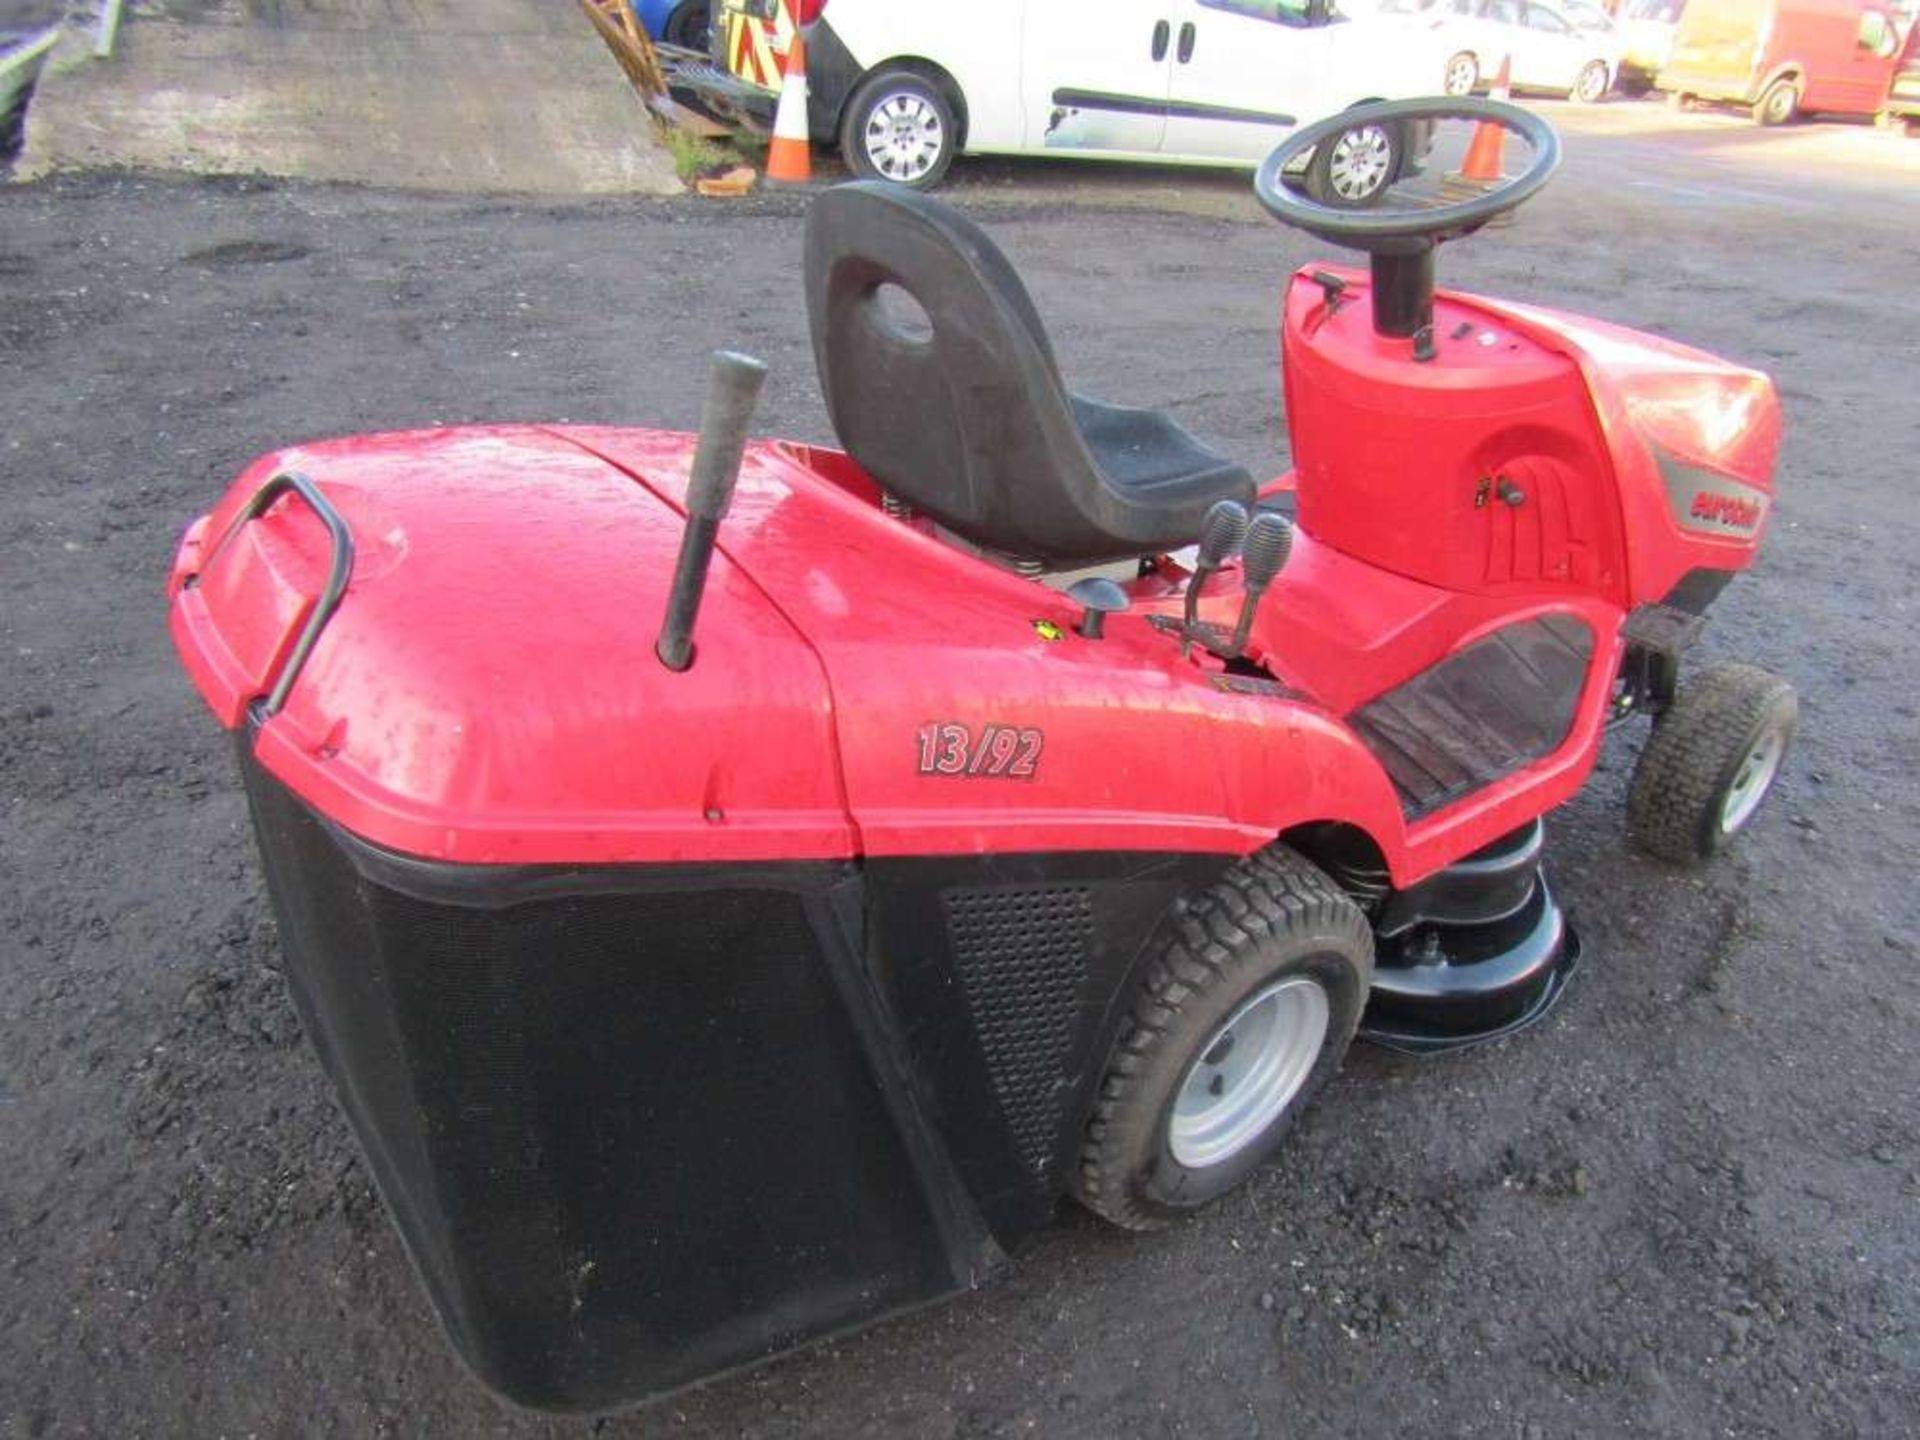 Eurotwin 13/92 Ride On Mower - Image 4 of 5